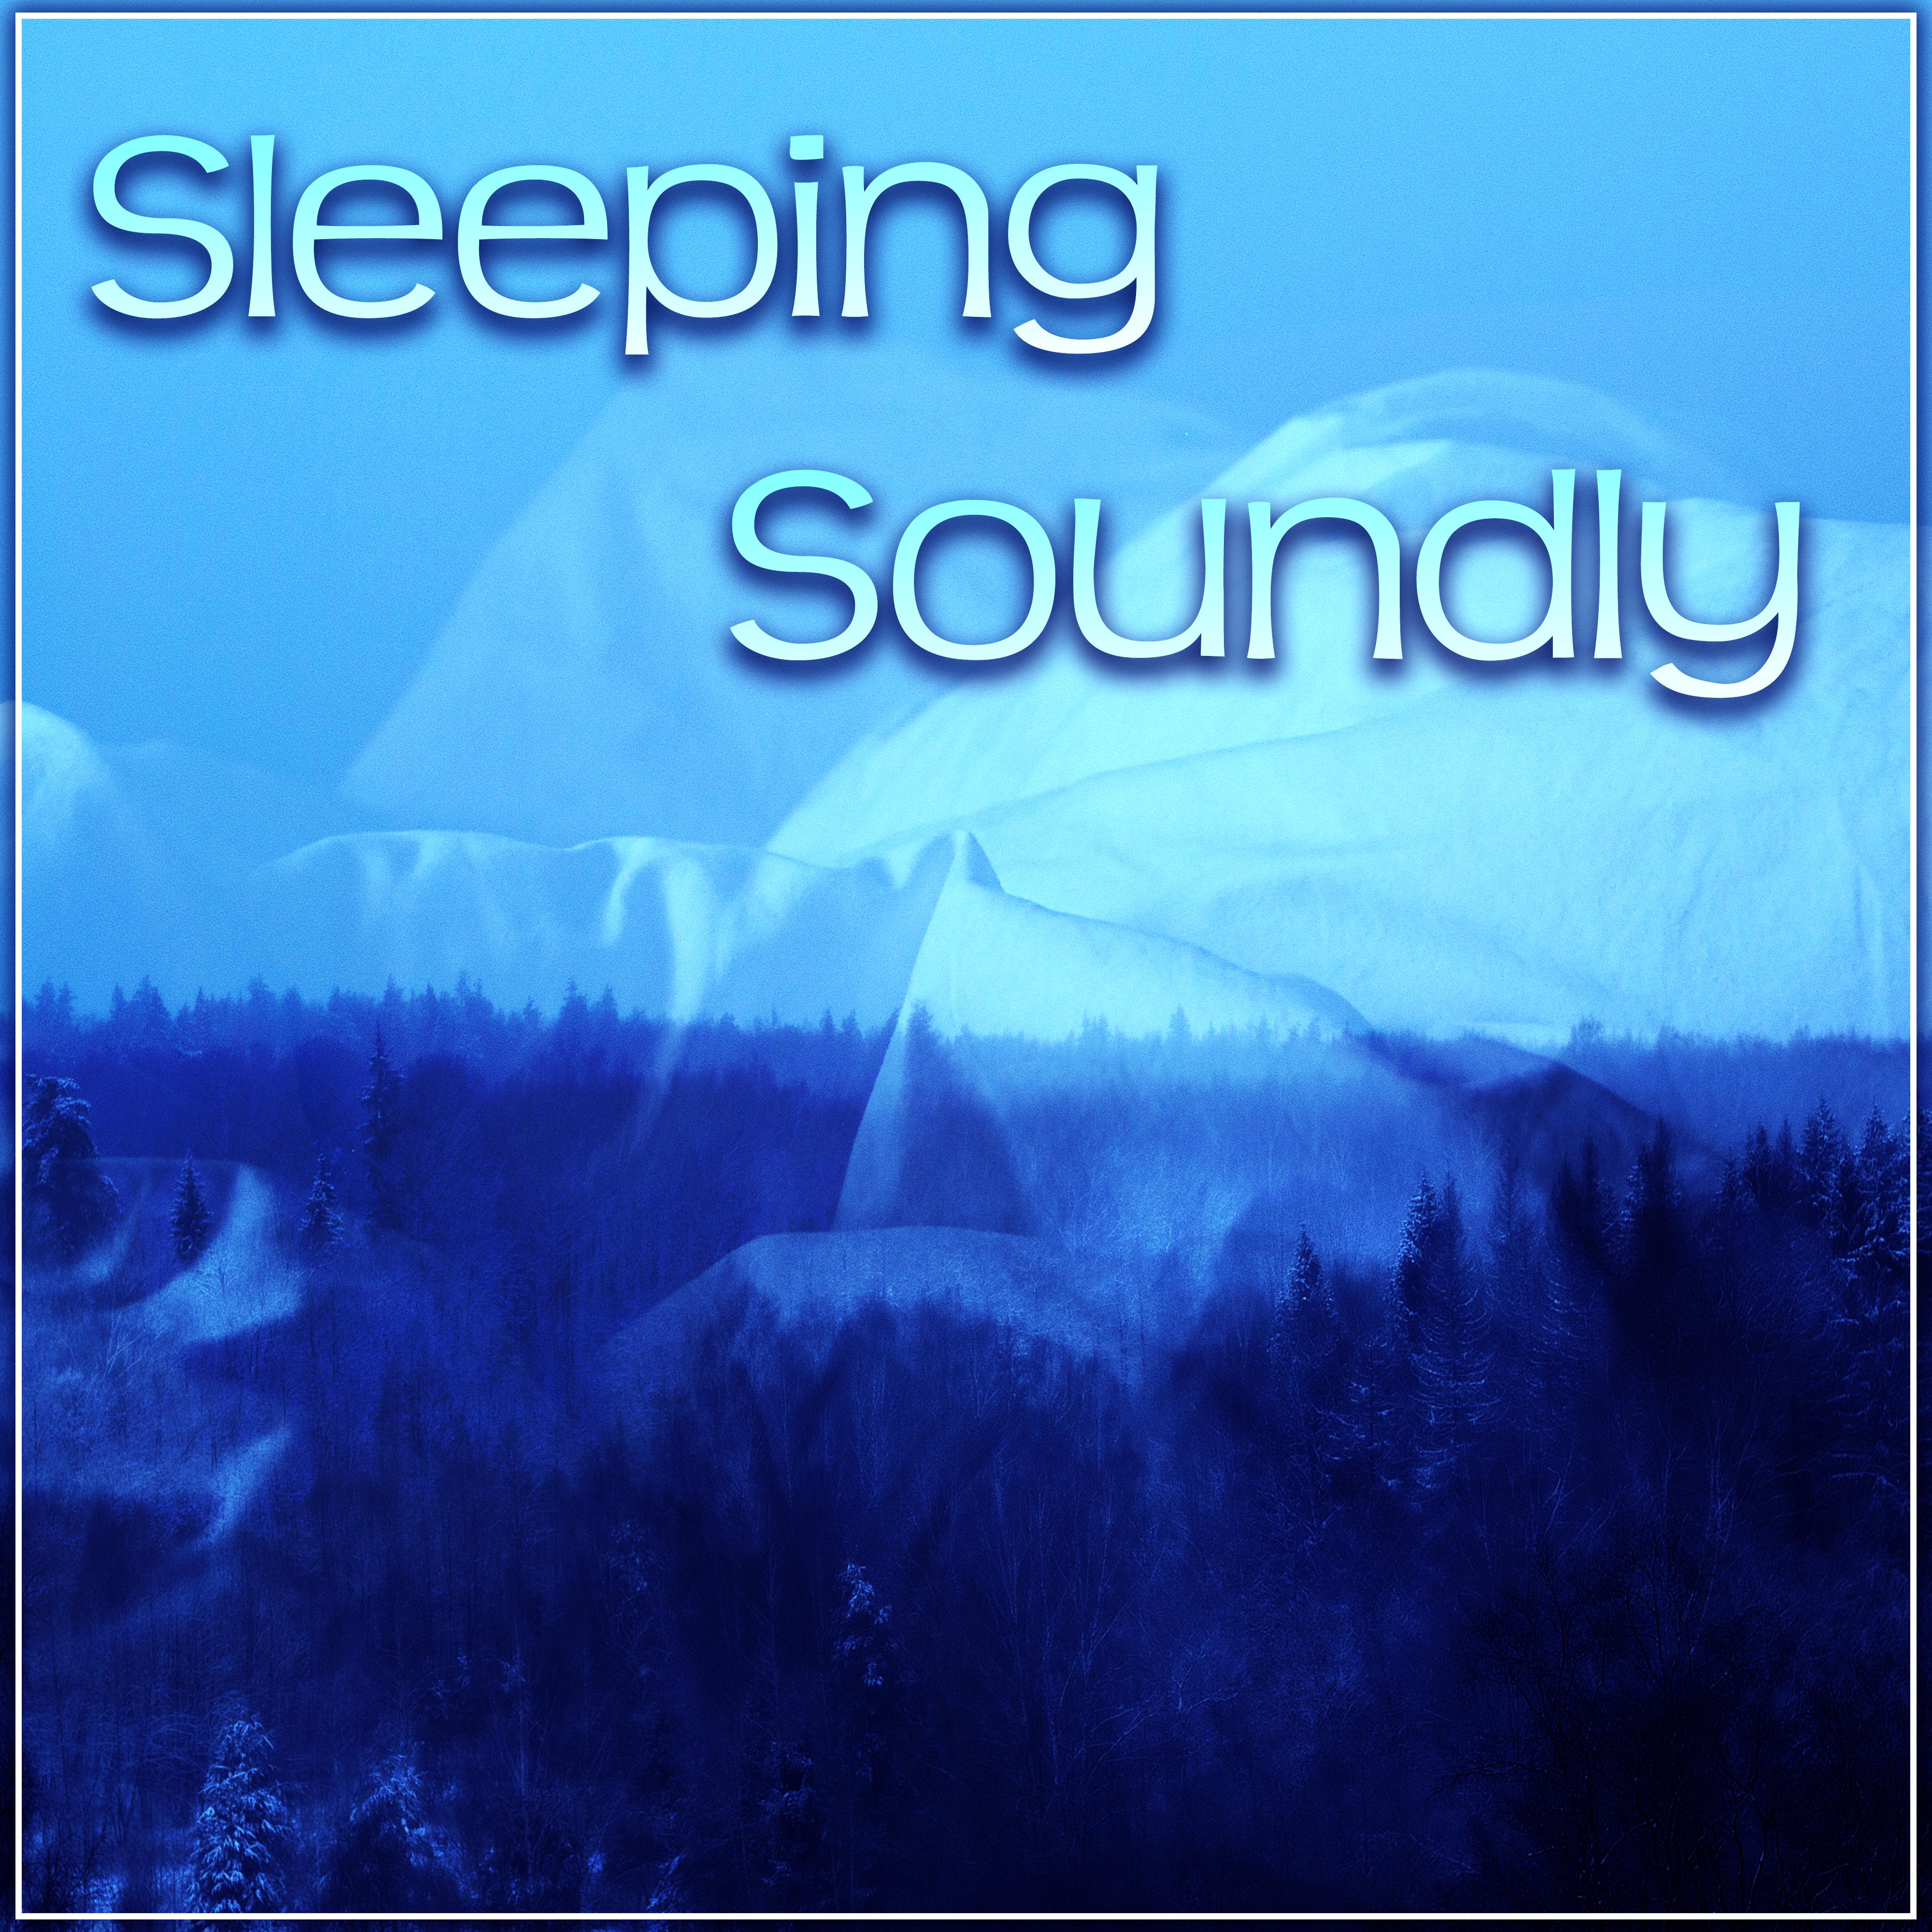 Sleeping Soundly  Healing Sleep, Rest Therapy, Pure Ambient, Sleep Music